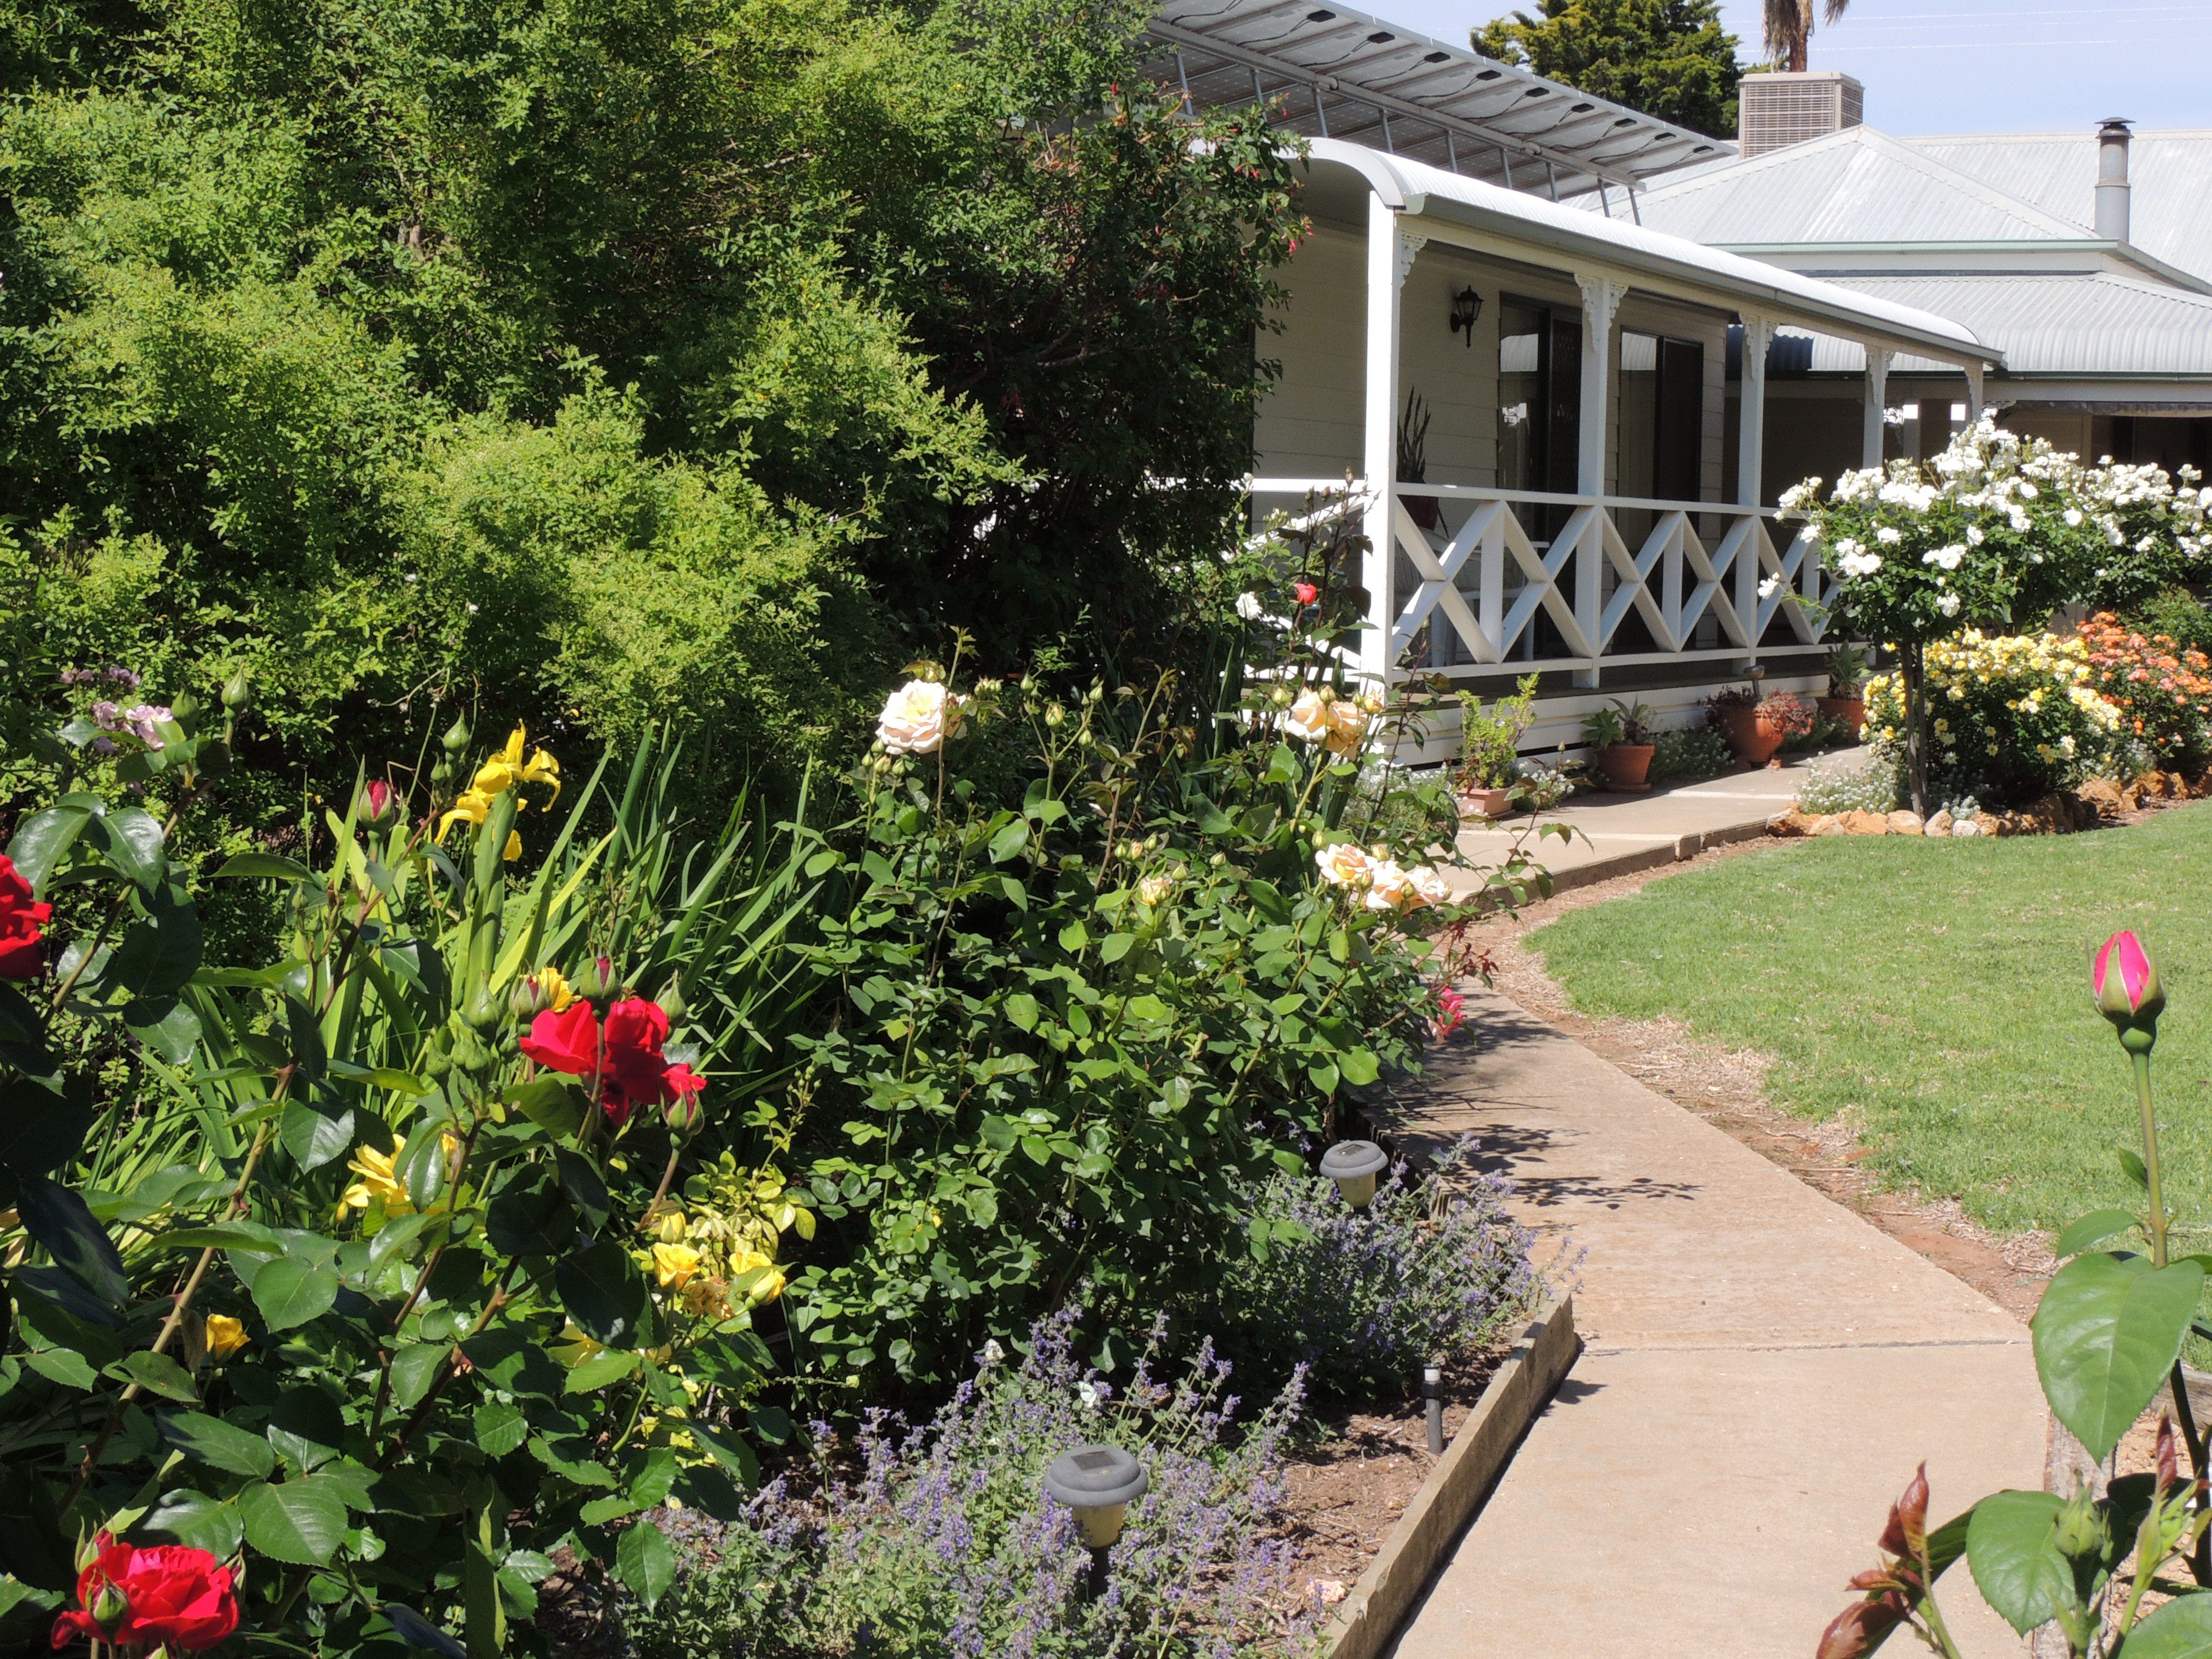 Burrabliss Bed and Breakfast - Accommodation NT